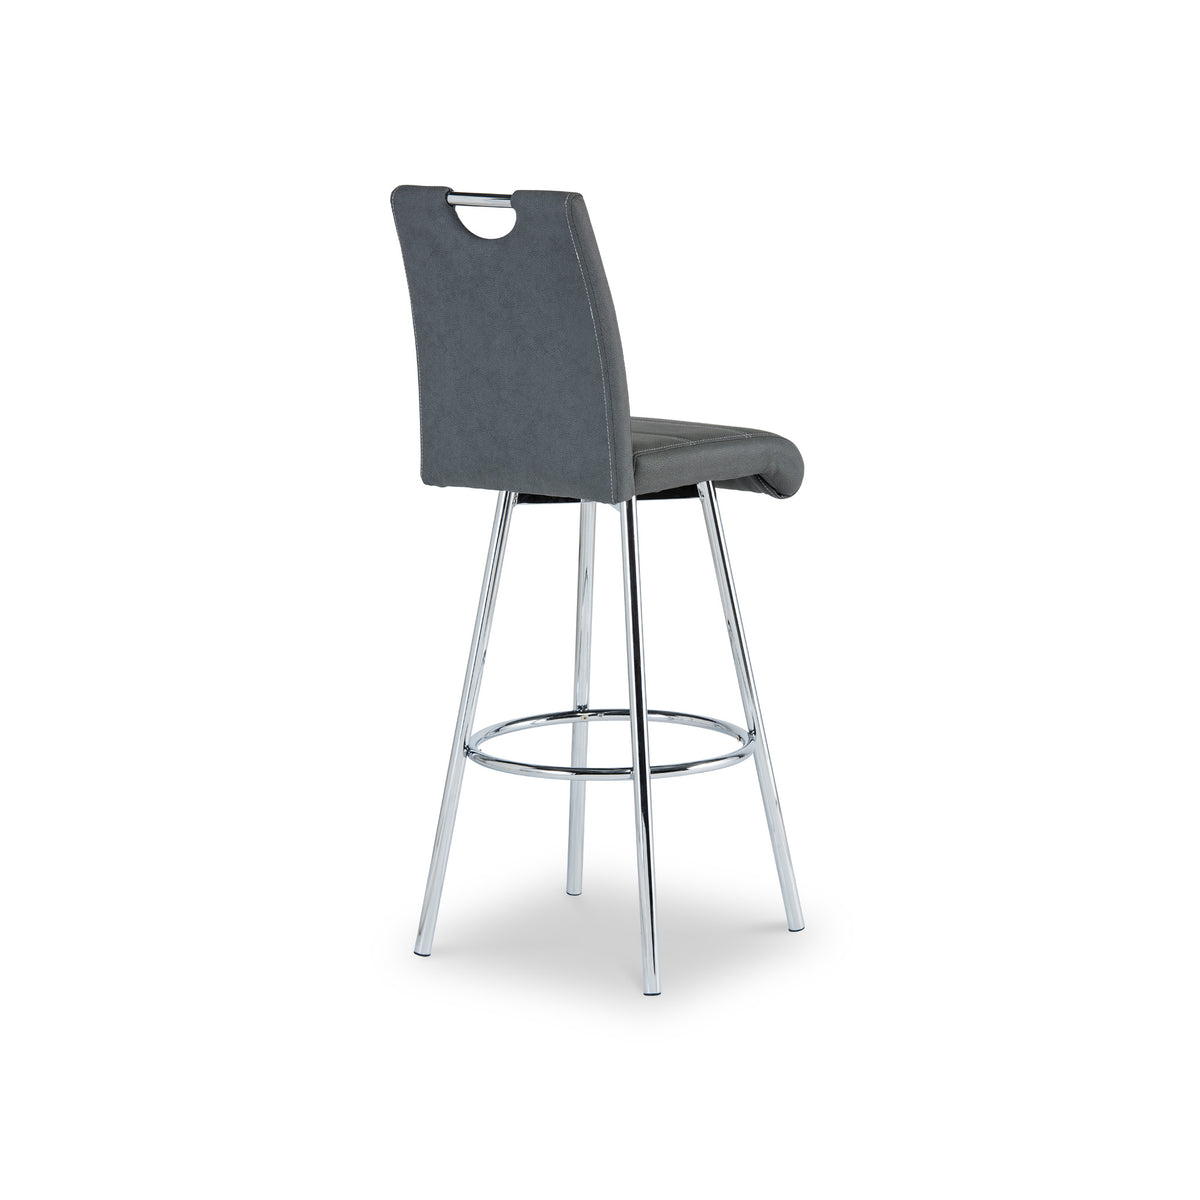 Simone Grey Faux Leather Bar Stool from Roseland Furniture